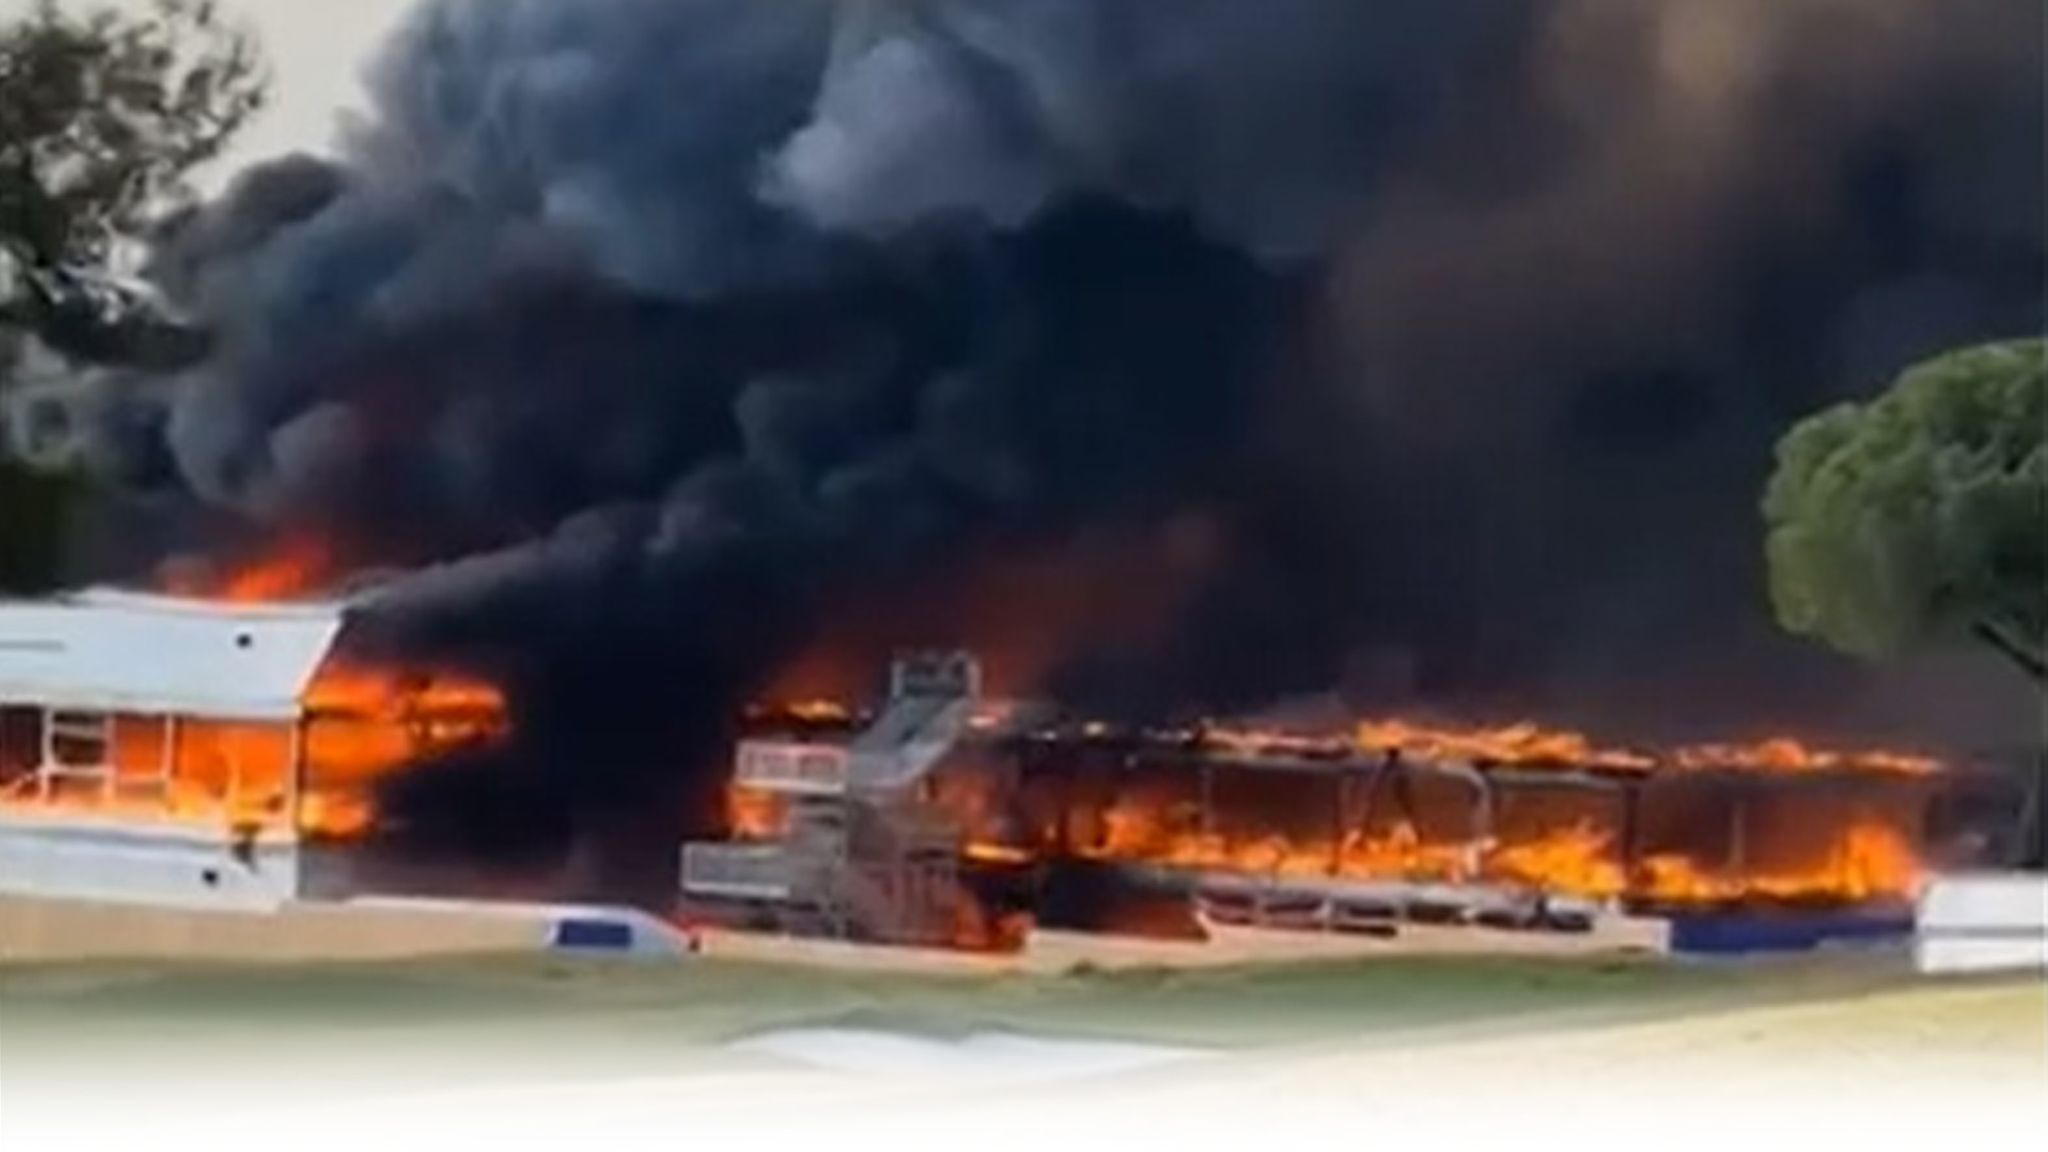 Ryder Cup's Marco Simone Golf and Country Club hit by large fire